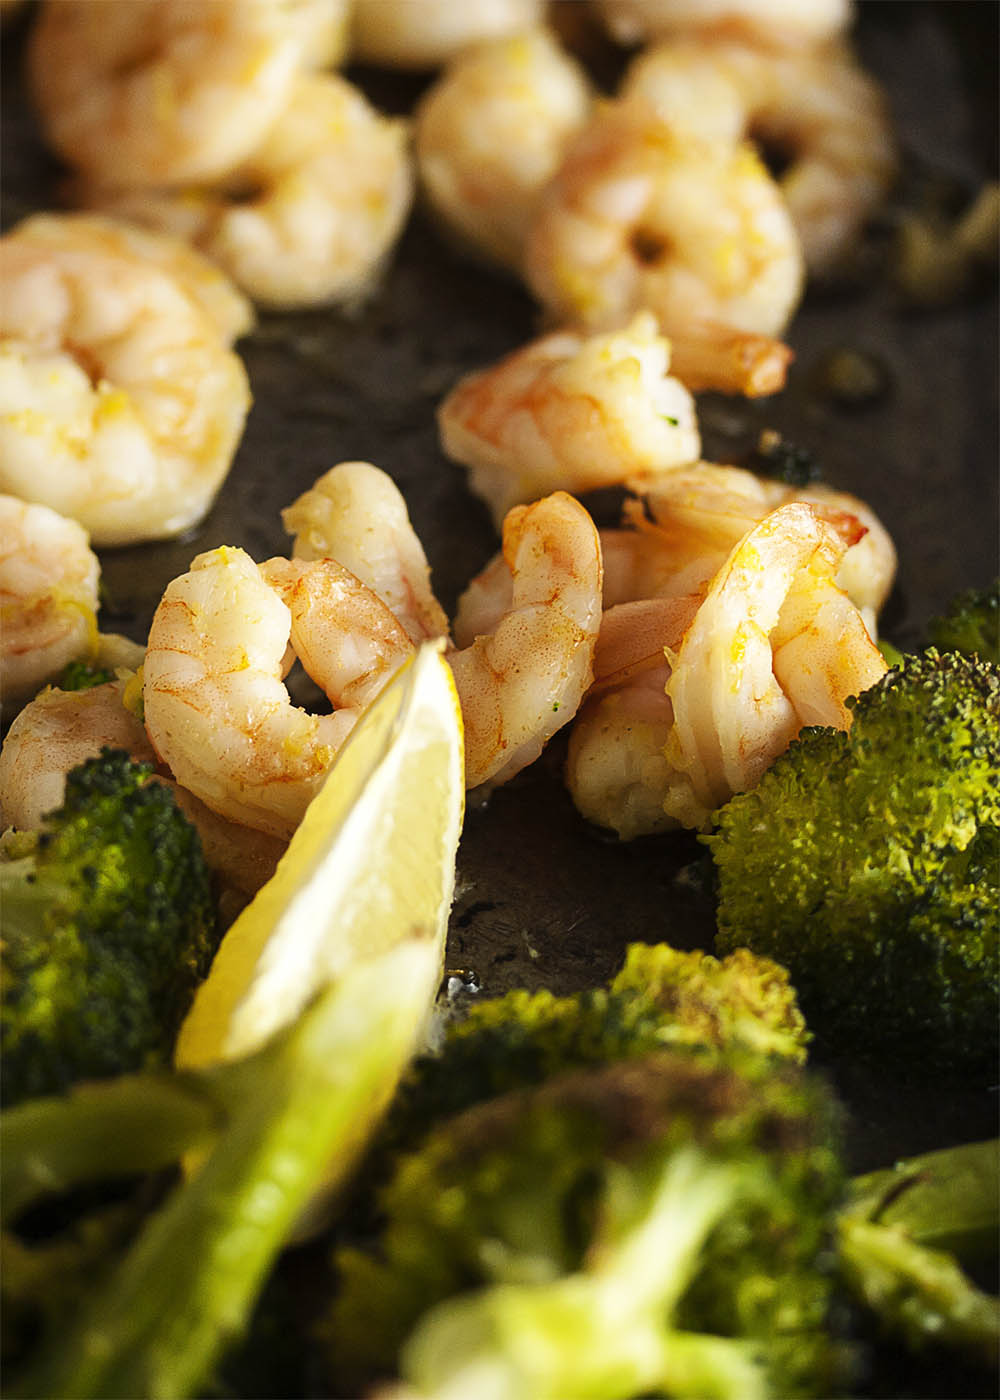 Oven Roasted Shrimp and Broccoli - This simple and satisfying dinner of shrimp, broccoli, and couscous goes from oven to table in only 20 minutes and two pans. | justalittlebitofbacon.com